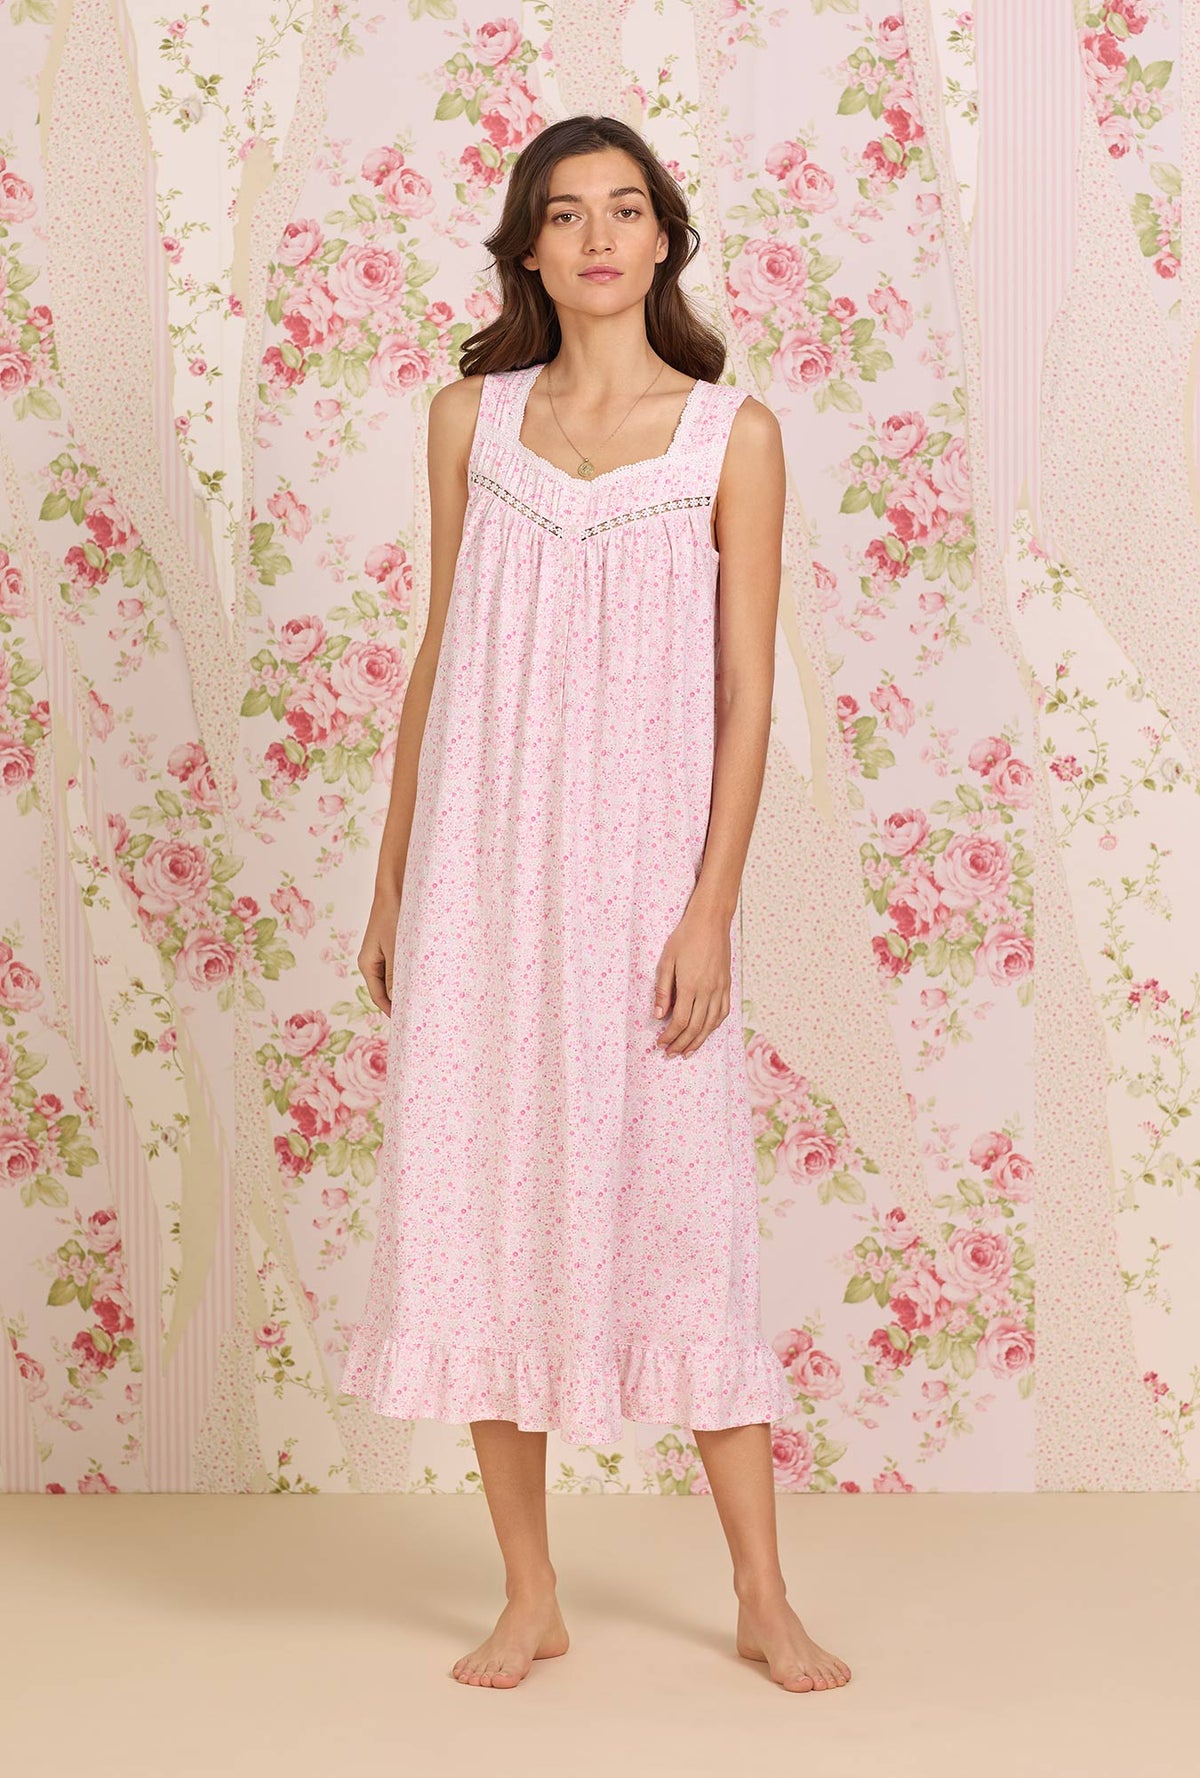   A lady wearing pink sleeveless Cotton Knit Long Nightgown with spring Garden printa